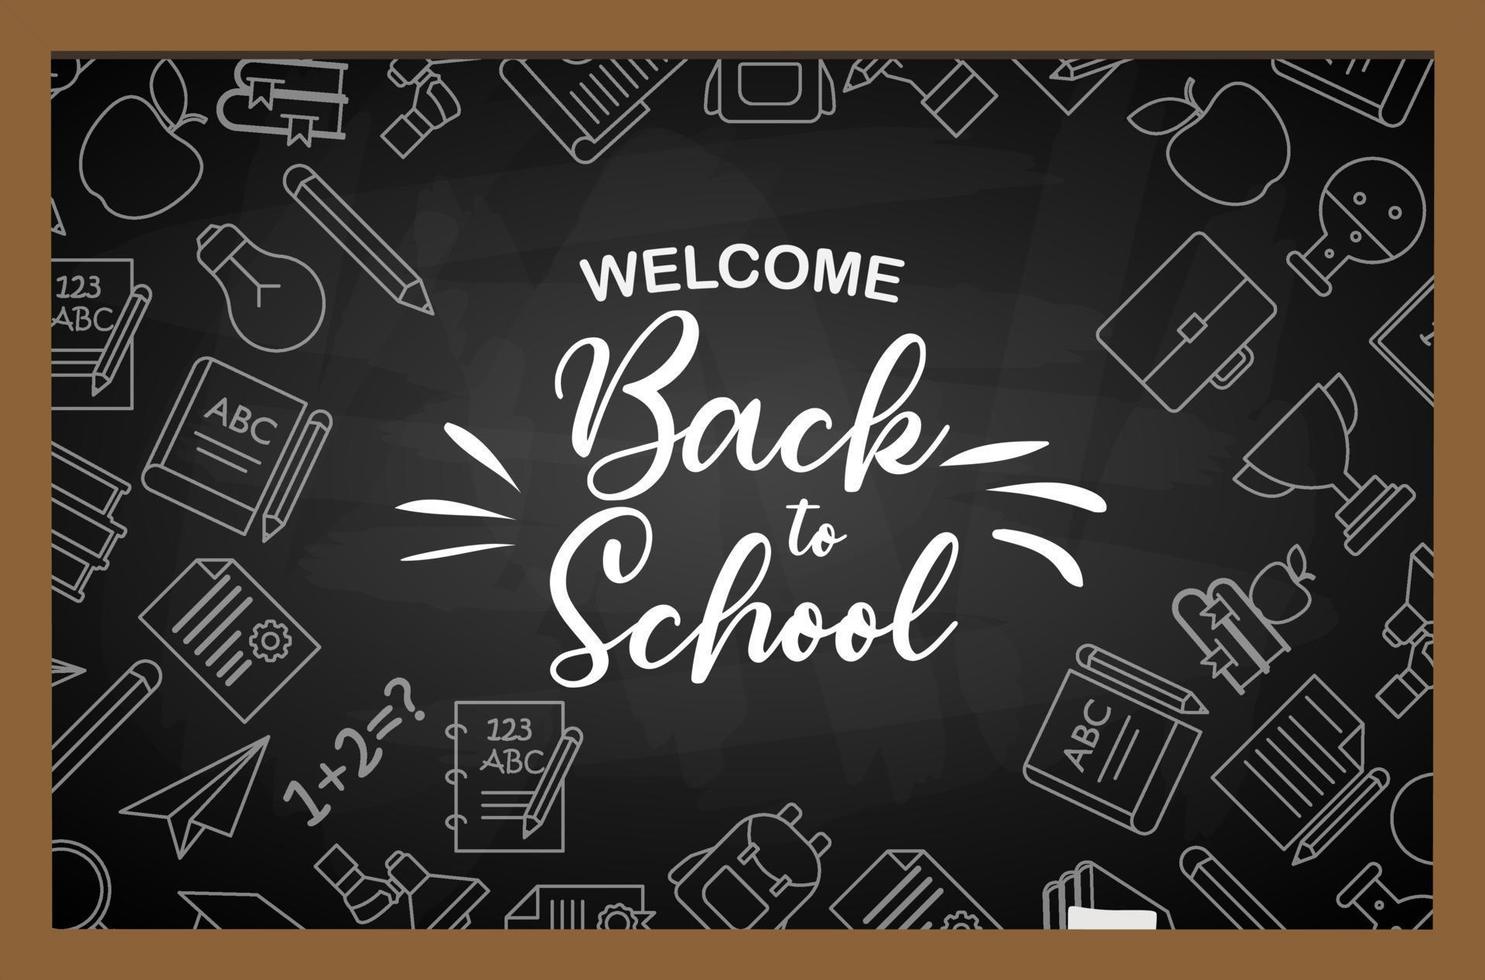 Back to School banner with texture from line art icons of education, science objects and office supplies on the daark background vector